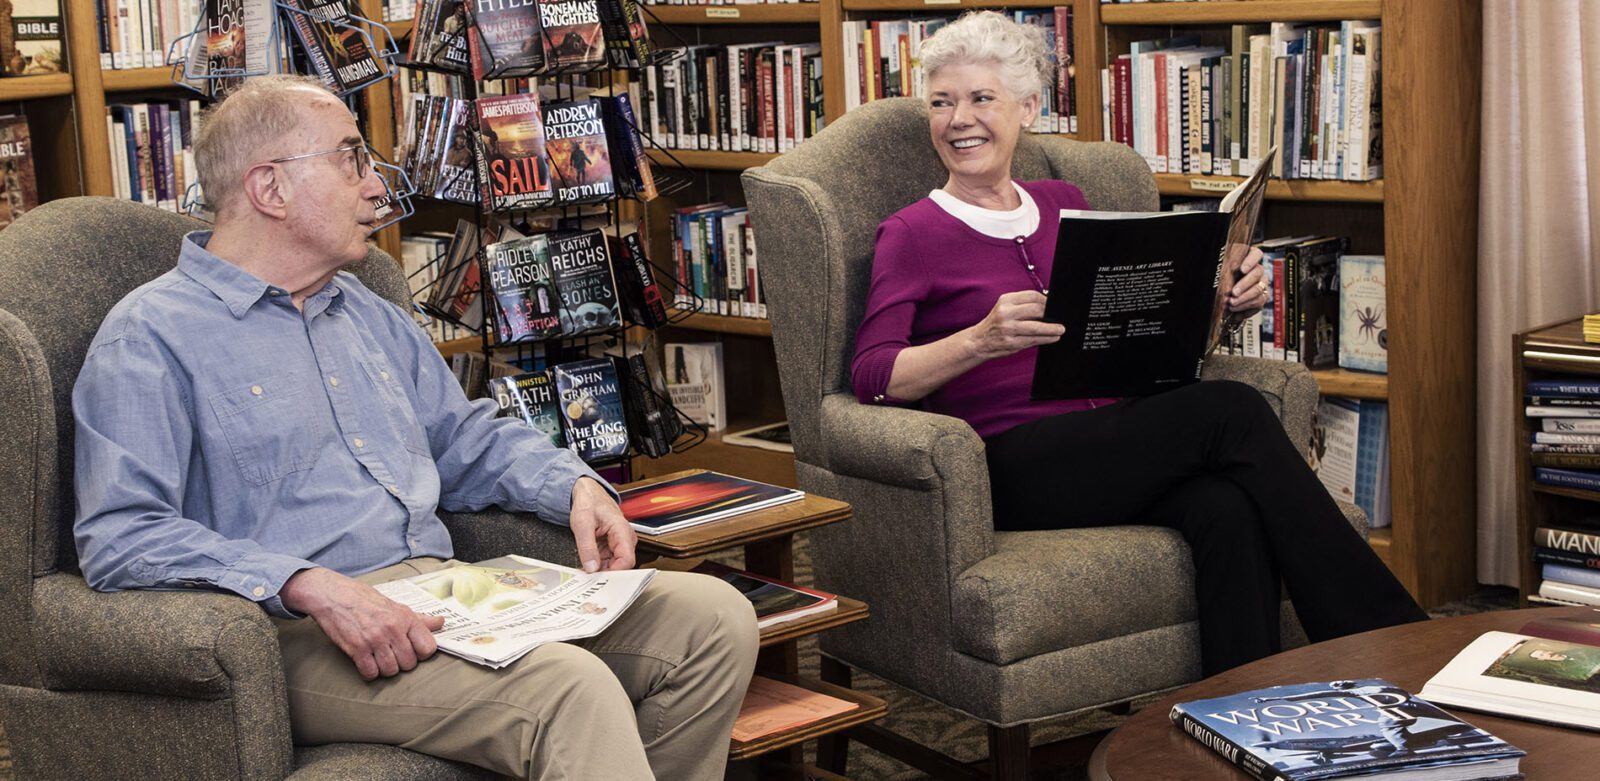 man and woman sitting in comfy chairs reading